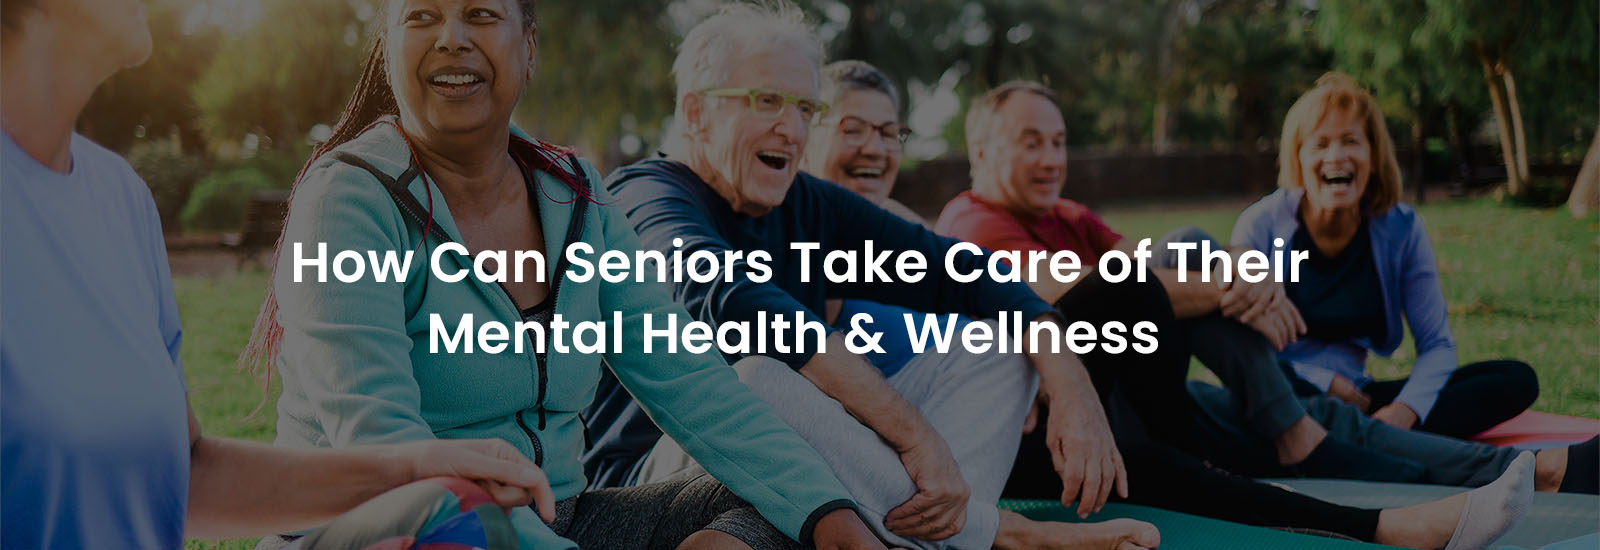 How Can Seniors Take Care of Their Mental Health & Wellness | Banner Image